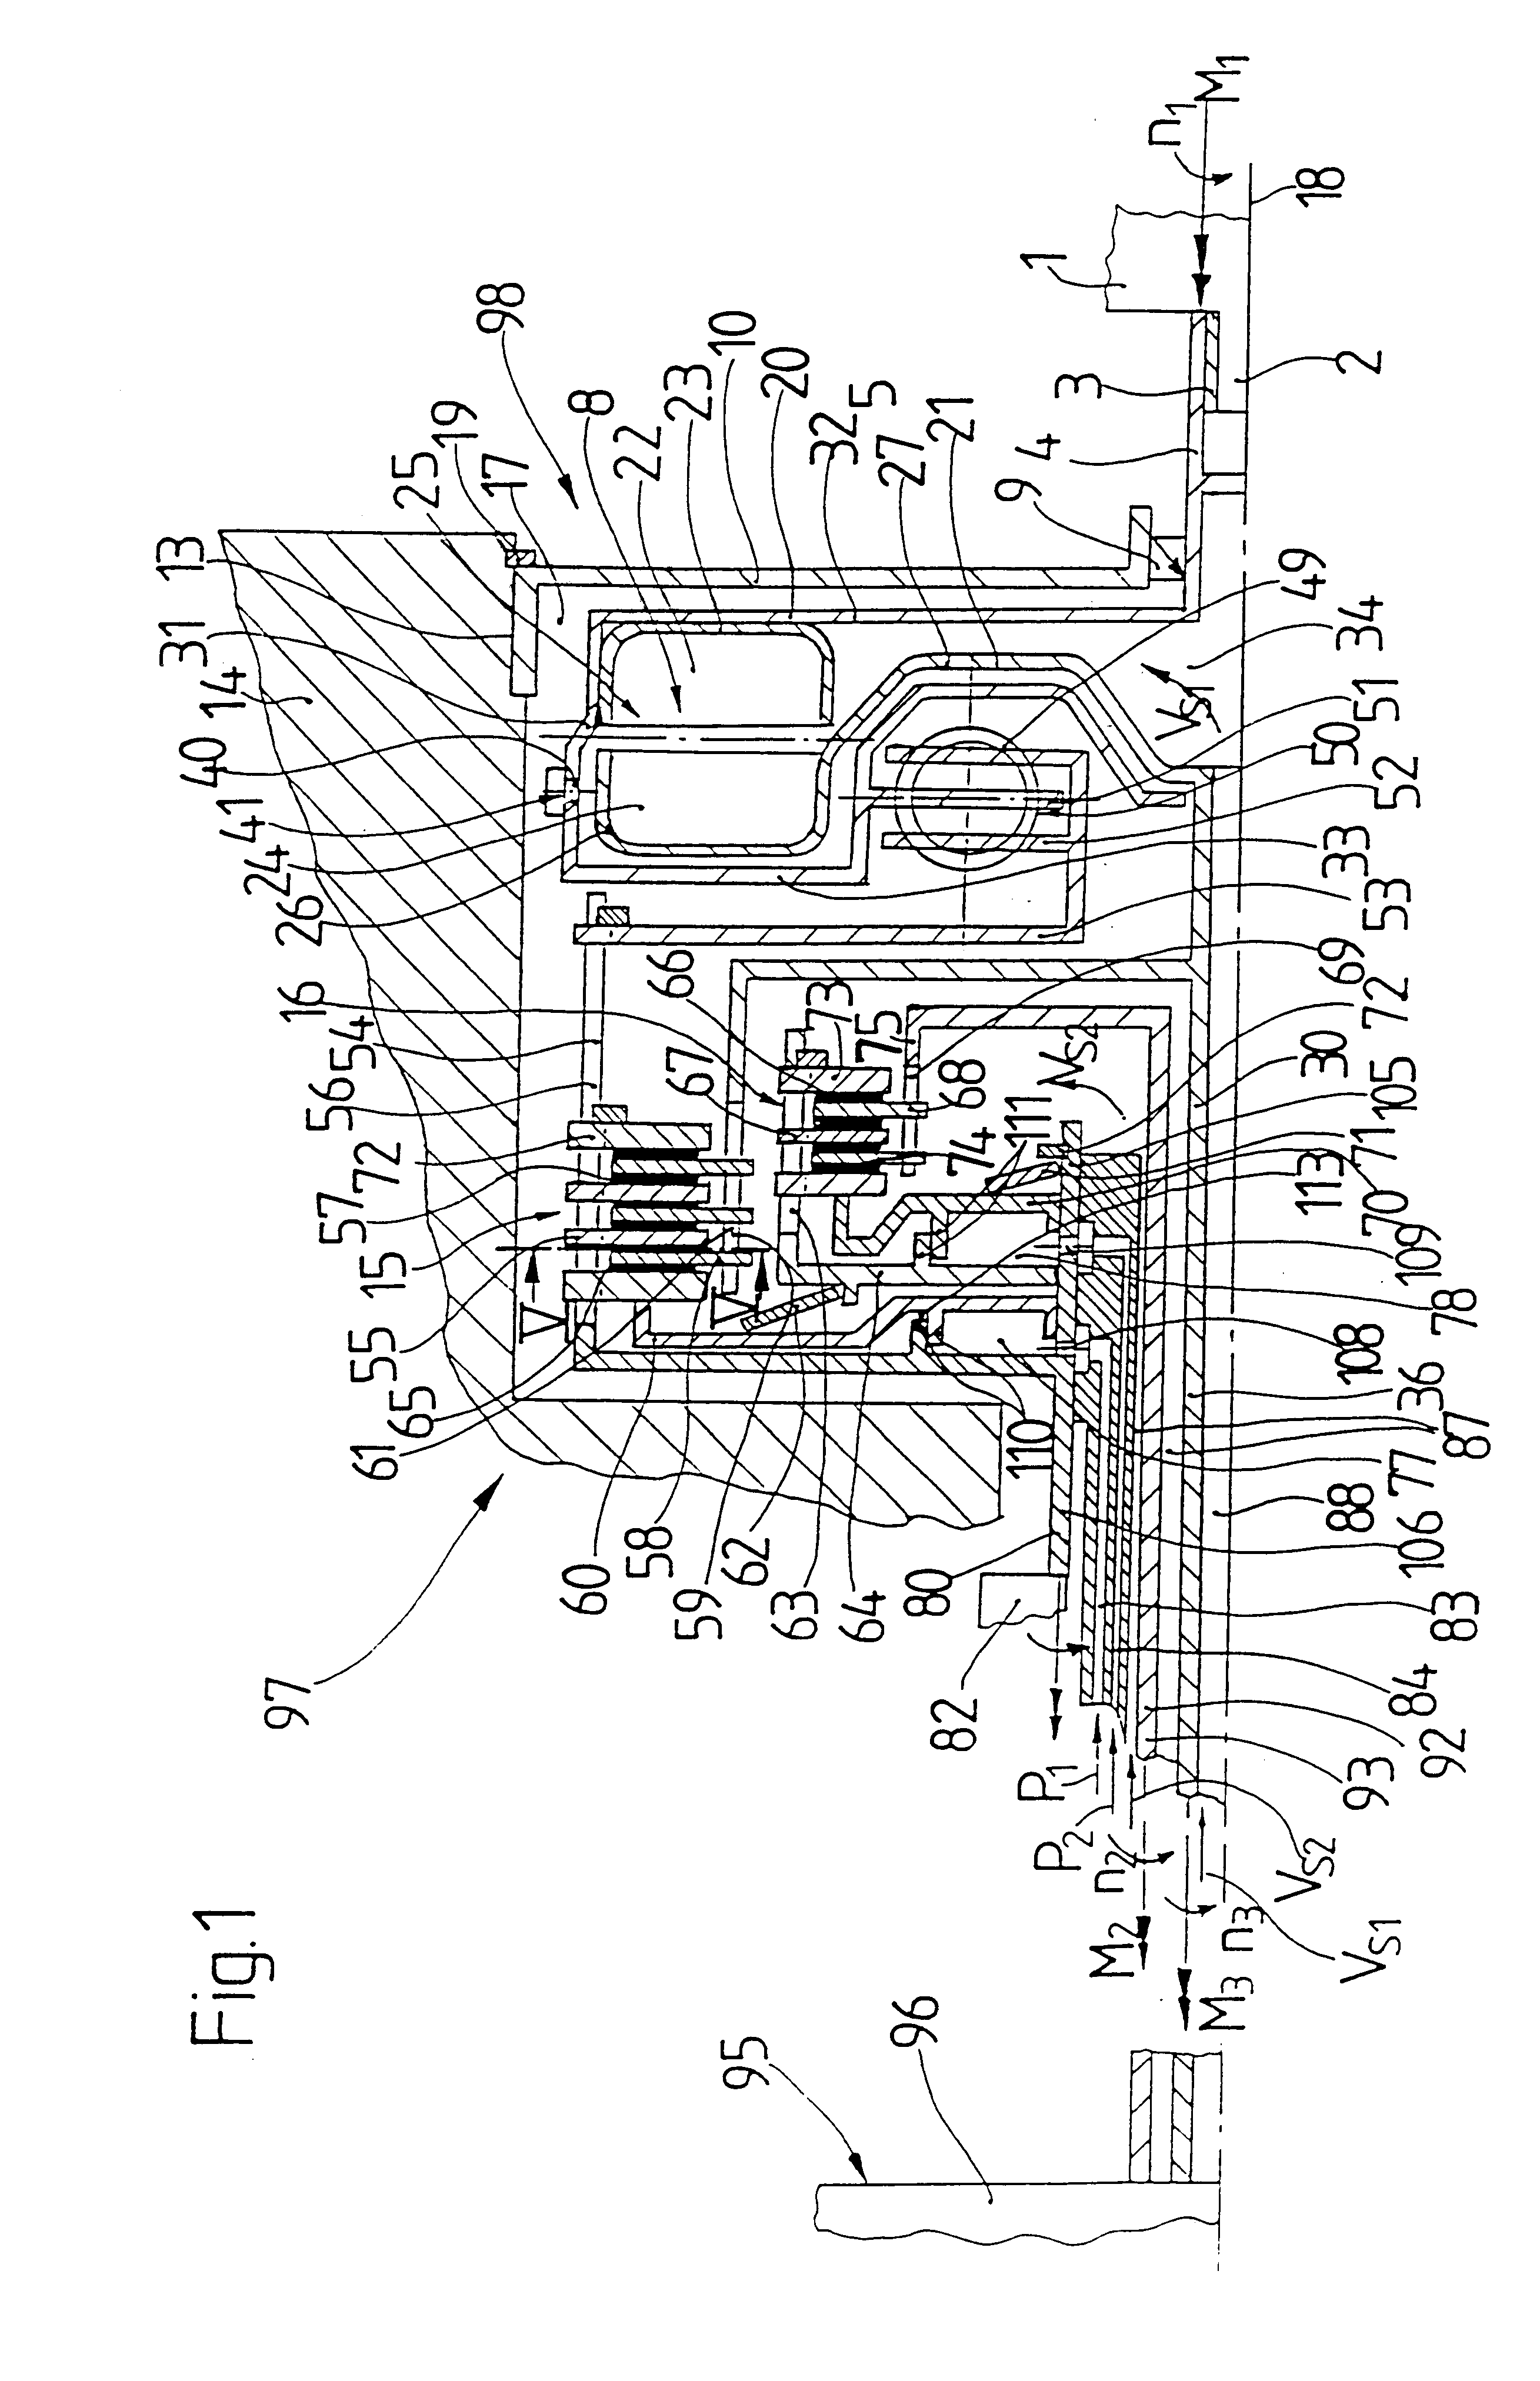 Clutch device with a hydrodynamic clutch and at least two friction clutches